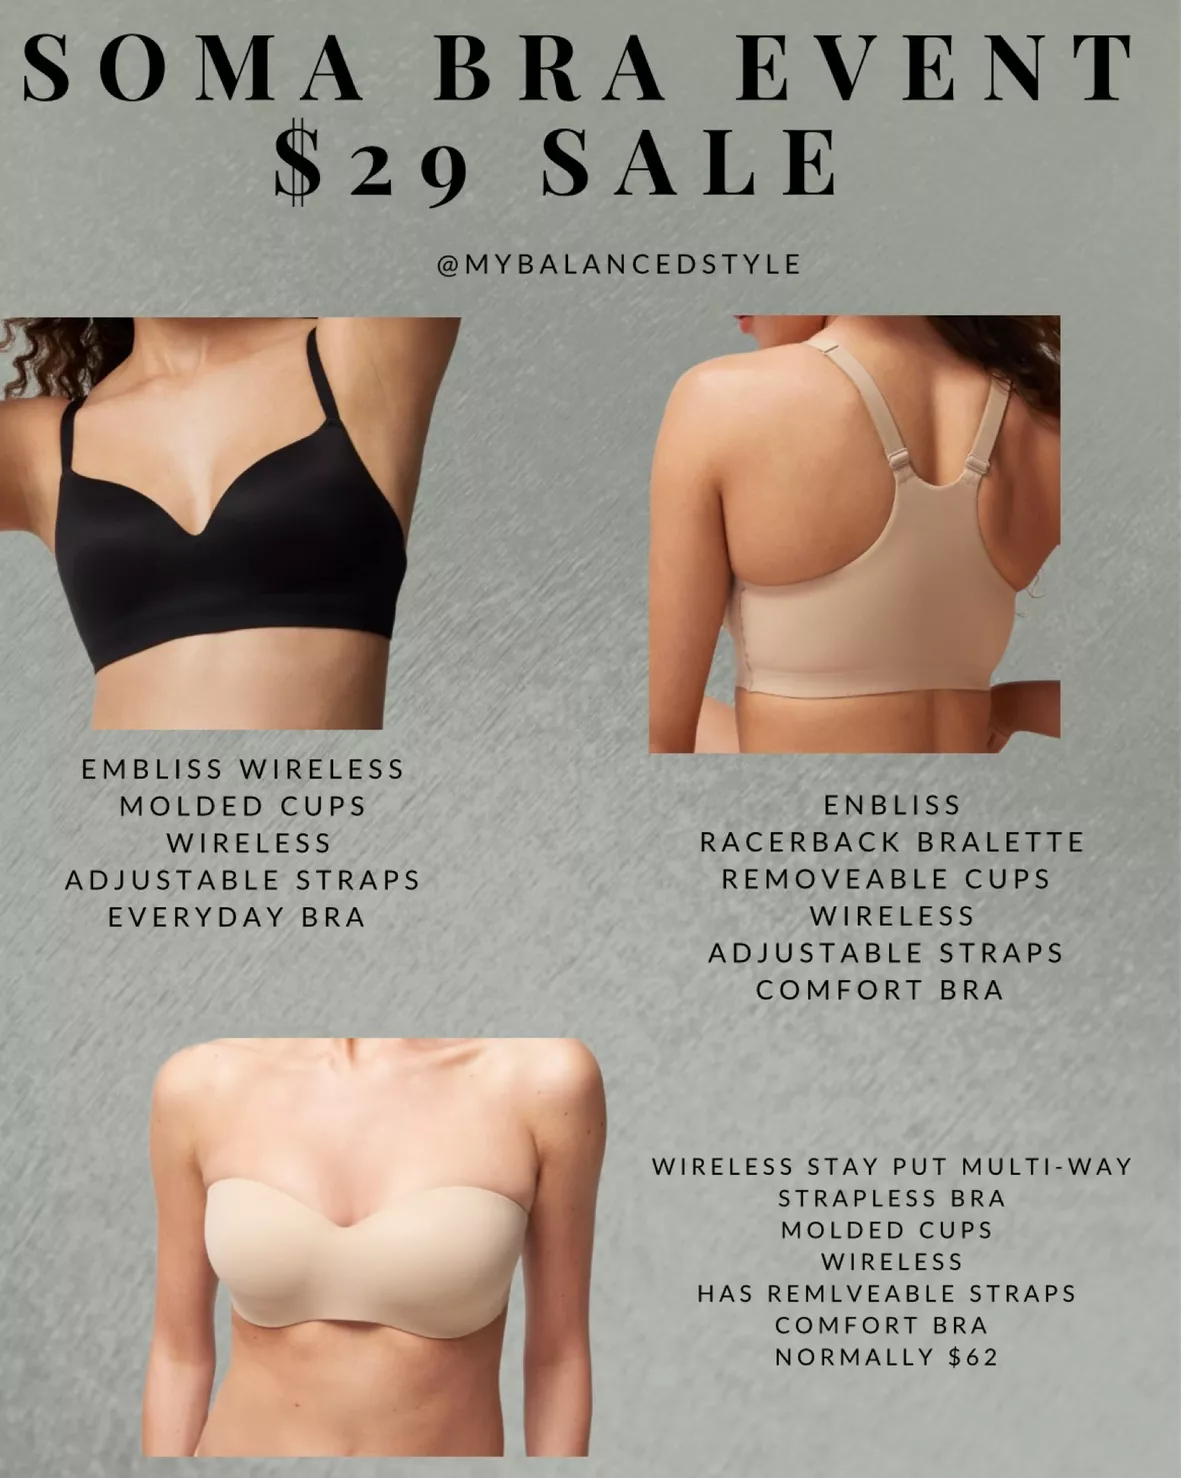 Soma Intimates - Strapless bras CAN be comfortable. Our